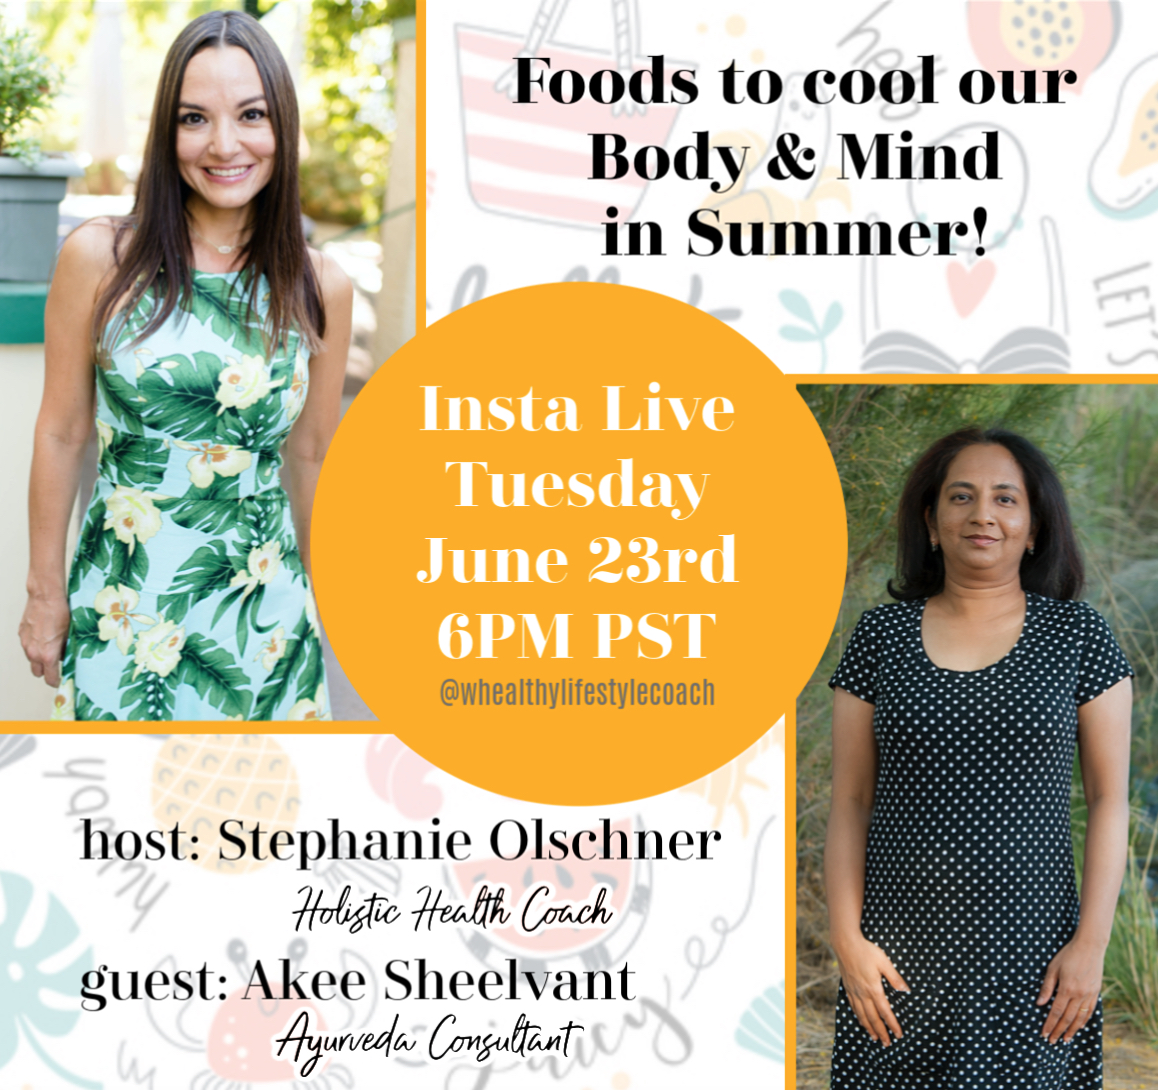 WHAT FOODS TO EAT IN SUMMER 

INSTA LIVE @whealthylifestylecoach - Tue, June 23rd at 6PM PST

Learn all about 'energetically cooling' foods to keep body and mind cool this summer season. 
#ayurveda #summerdiet #healthydiet #yoga #naturaldiet #summer #heatwave #vegetarian #vegan